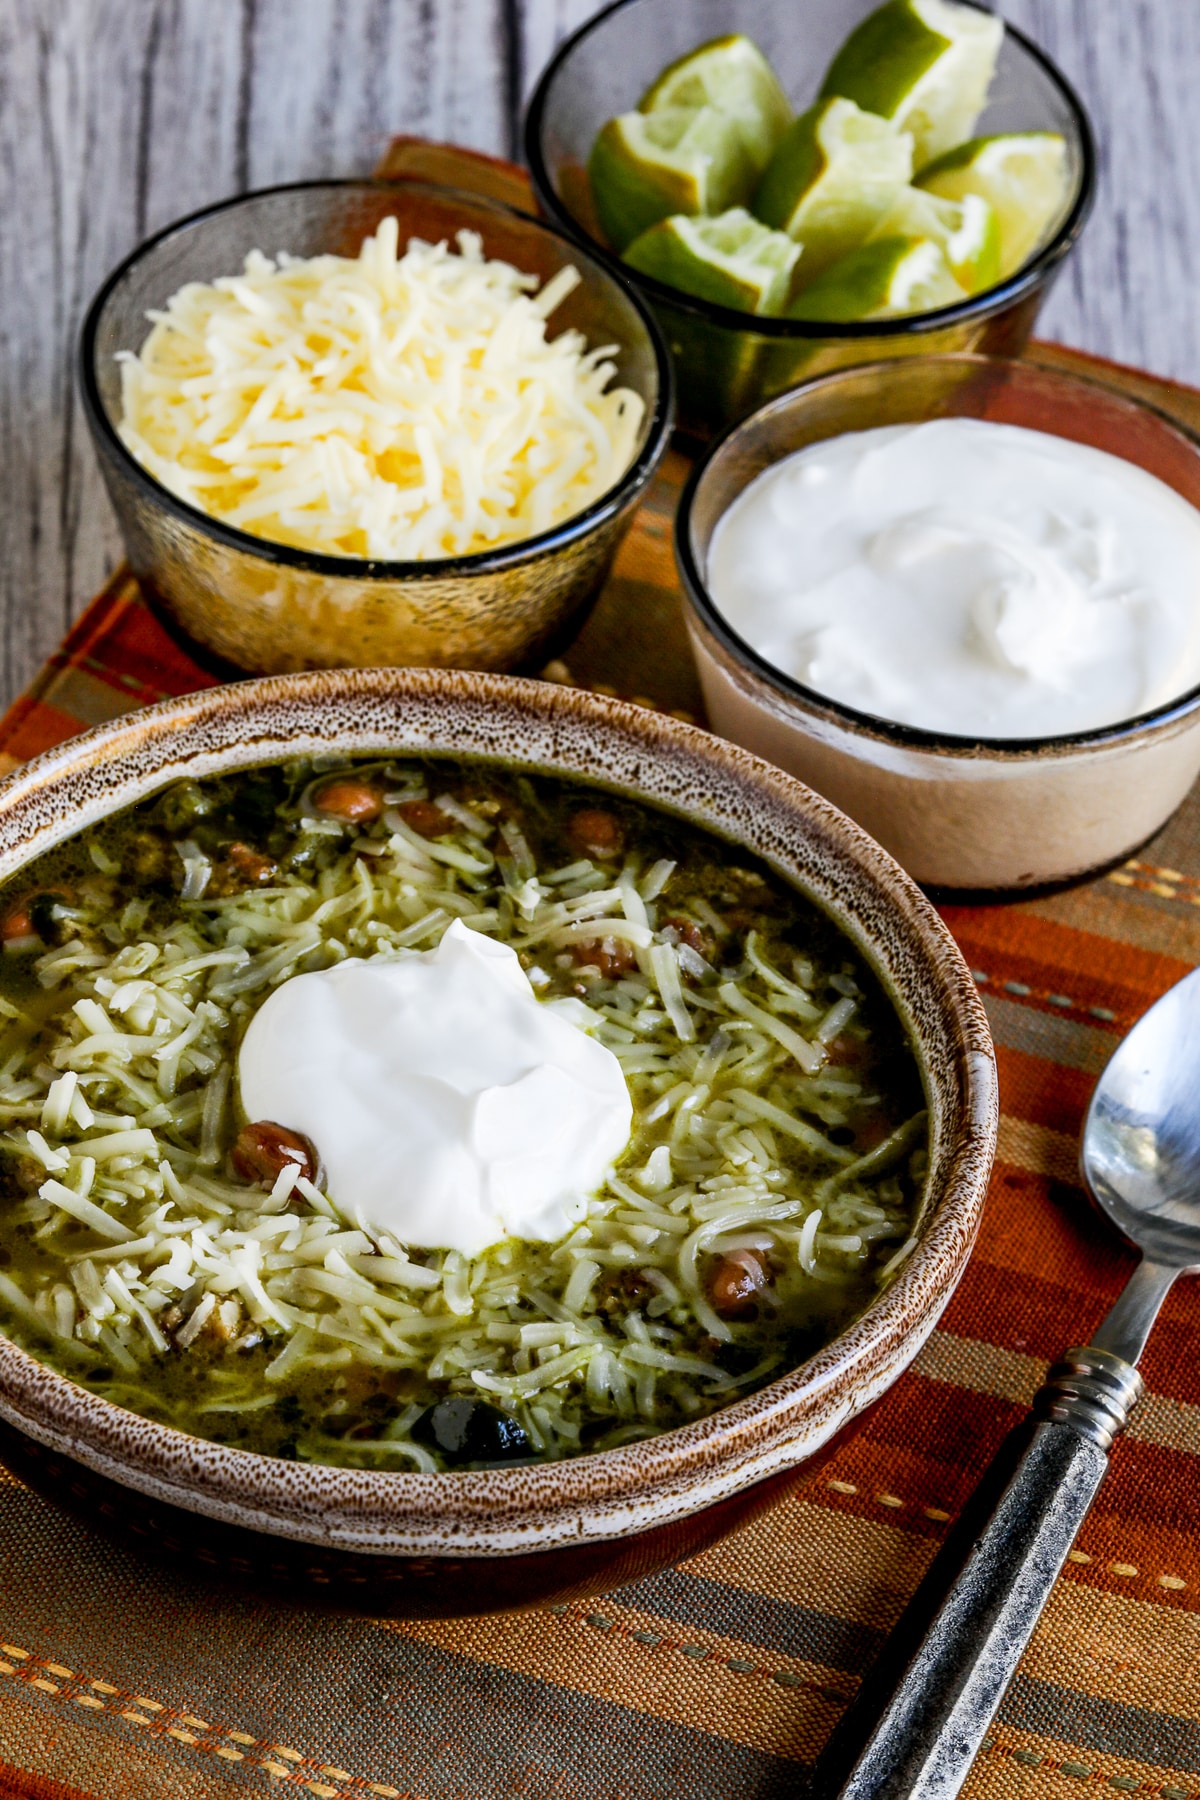 Turkey Pinto Bean Chili shown in serving bowl with cheese and sour cream